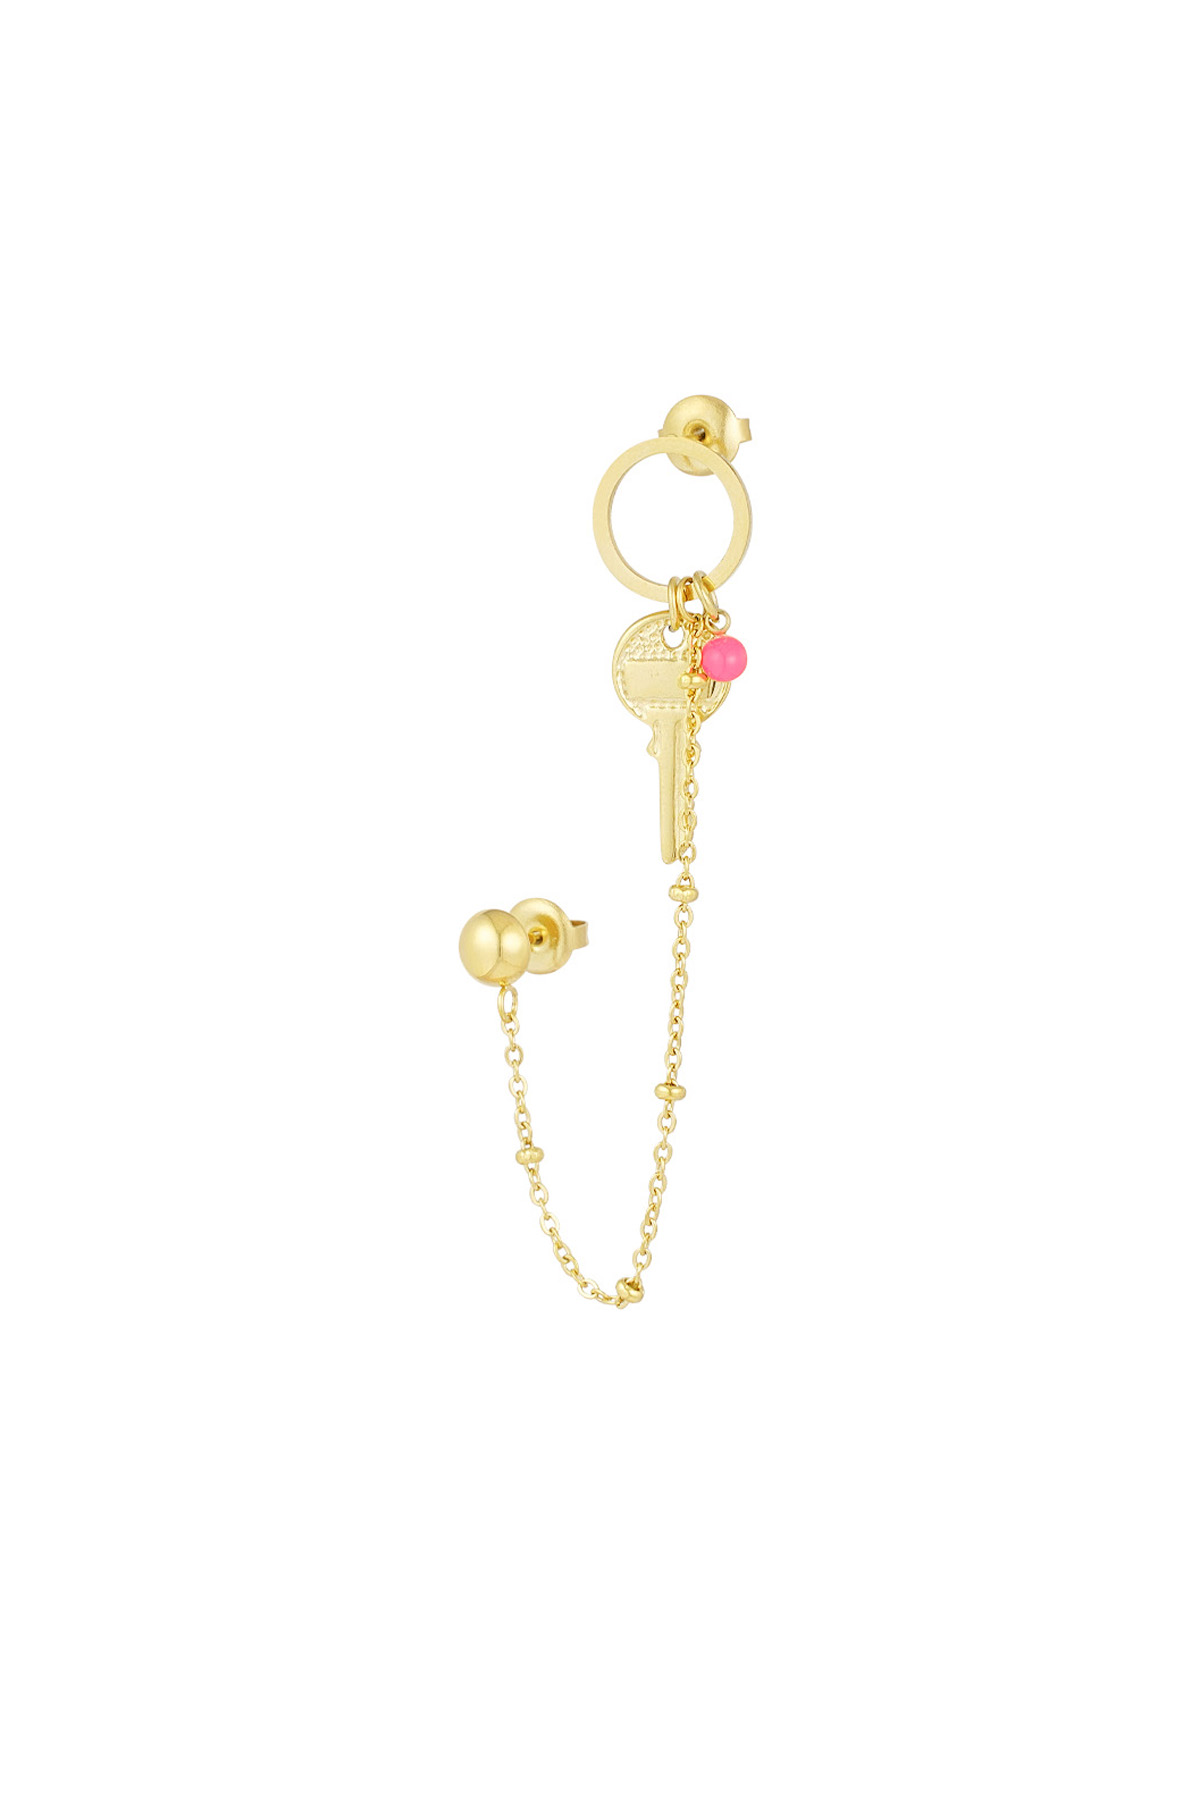 Earring key to my heart - gold h5 